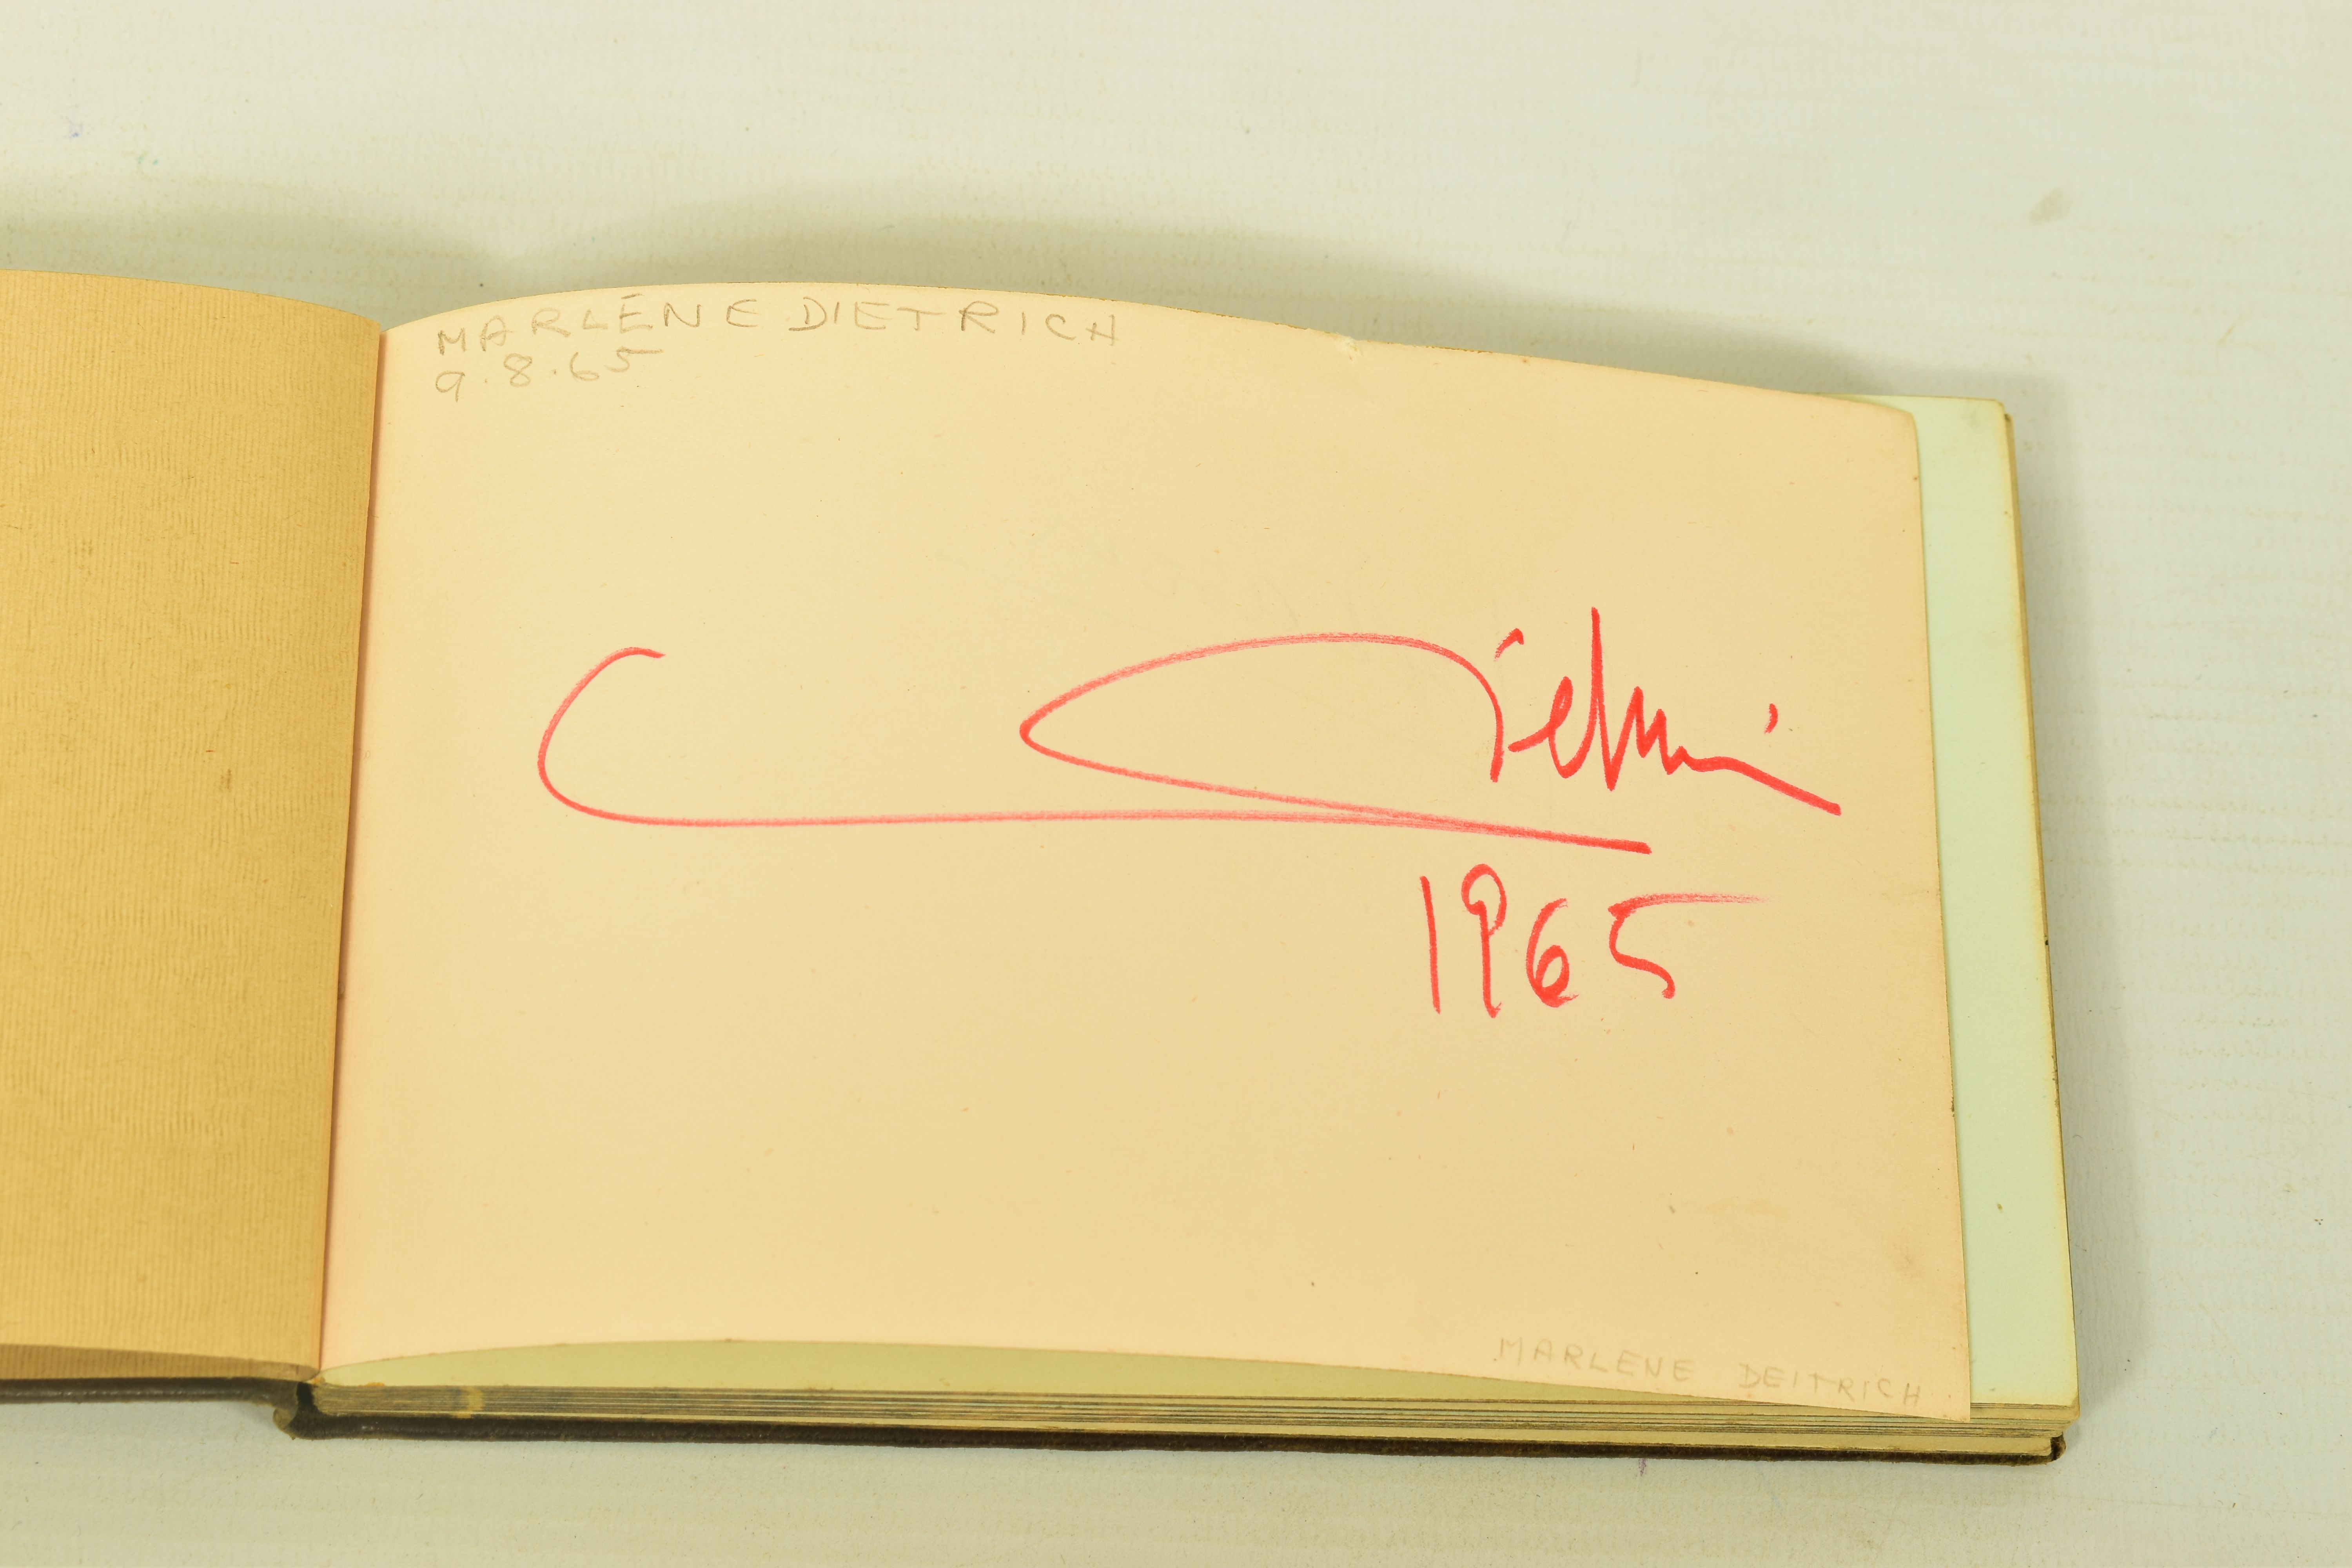 FILM & STAGE AUTOGRAPH ALBUM, a collection of signatures in an autograph album featuring some of the - Image 2 of 9